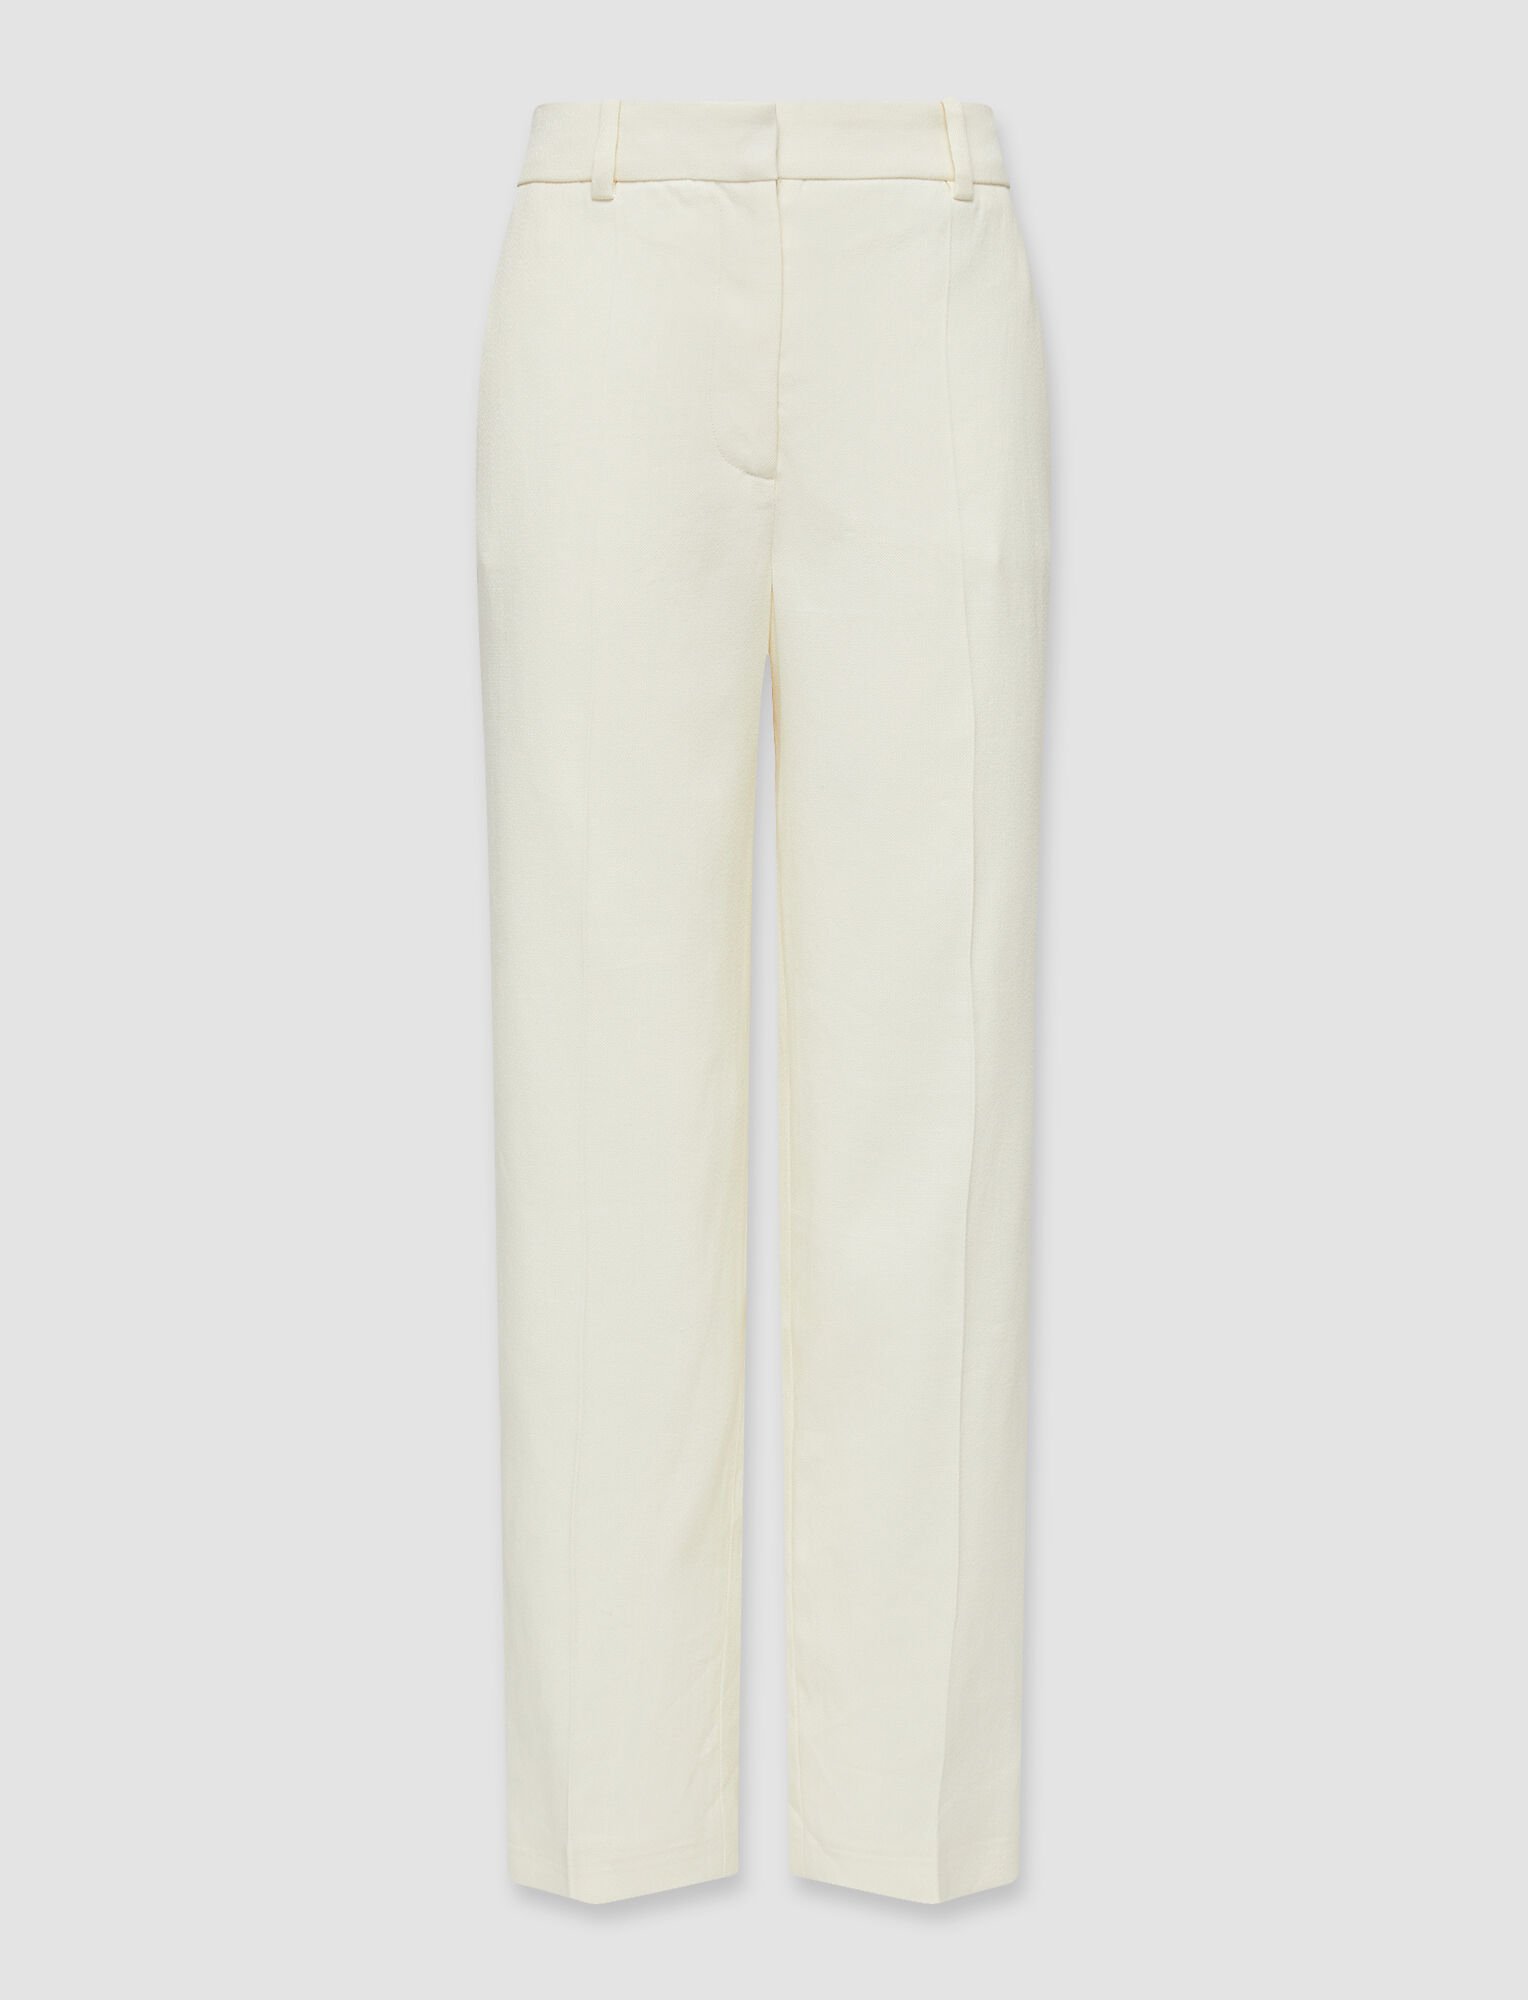 Joseph, Crepe Linen Stretch Trina Trousers, in Ivory